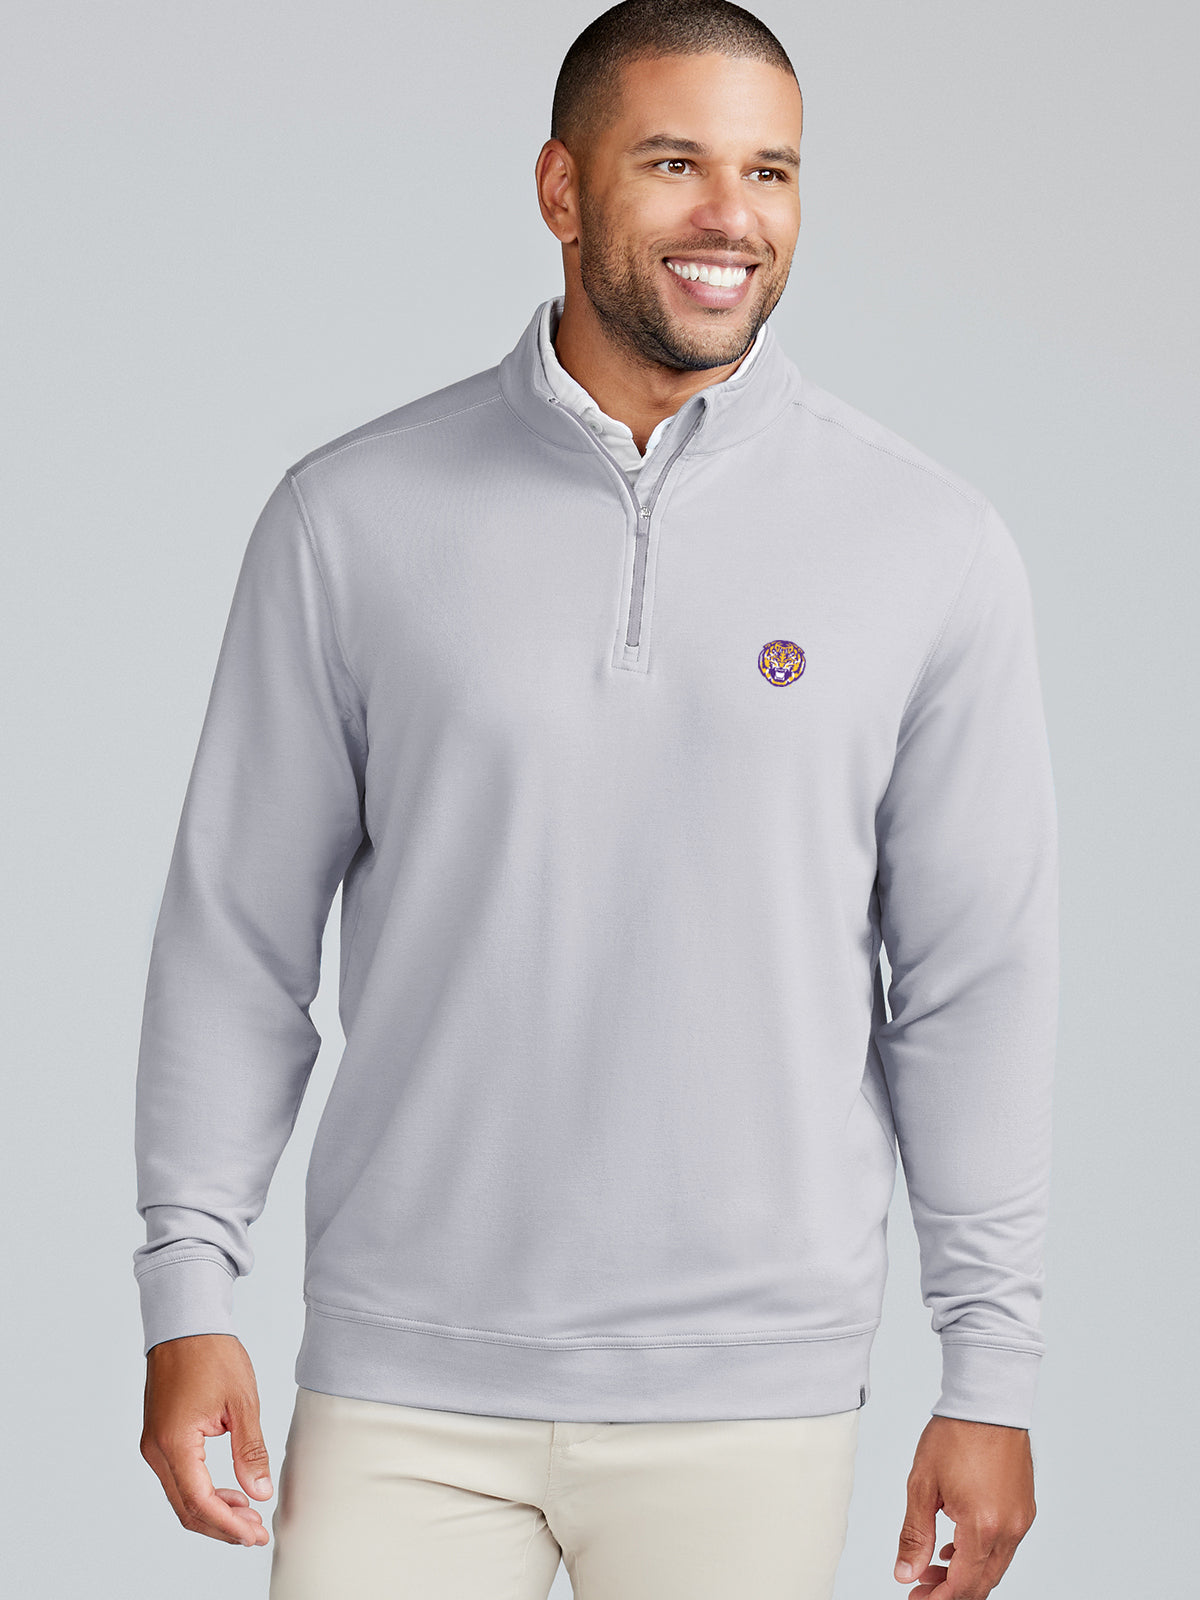 Cloud French Terry Quarter Zip - LSU - tasc Performance (Alloy)